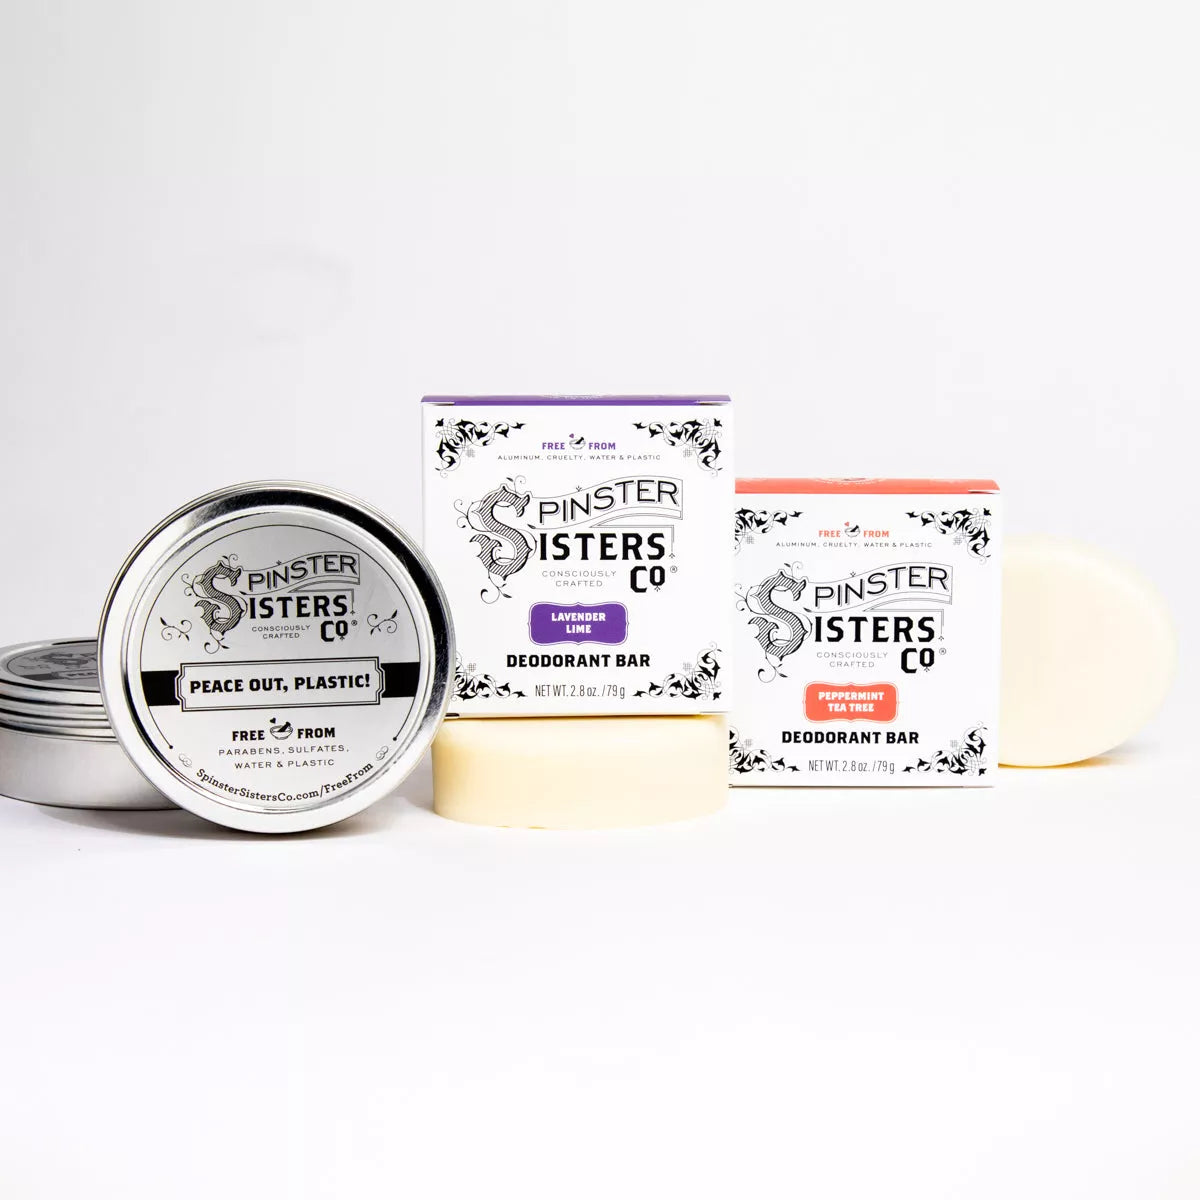 Spinster Sisters Deodorant bars in lavender lime and peppermint tea tree scents with an aluminum travel tin